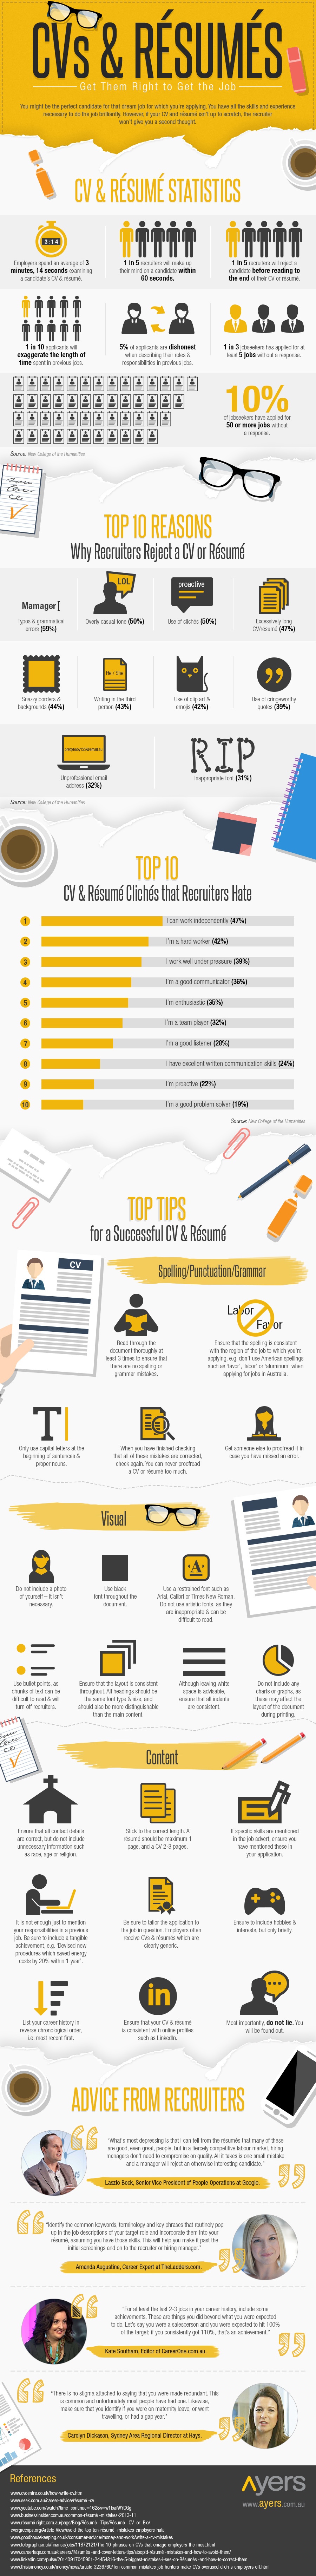 CVs & Resumes: Get Them Right to Get the Job Infographic